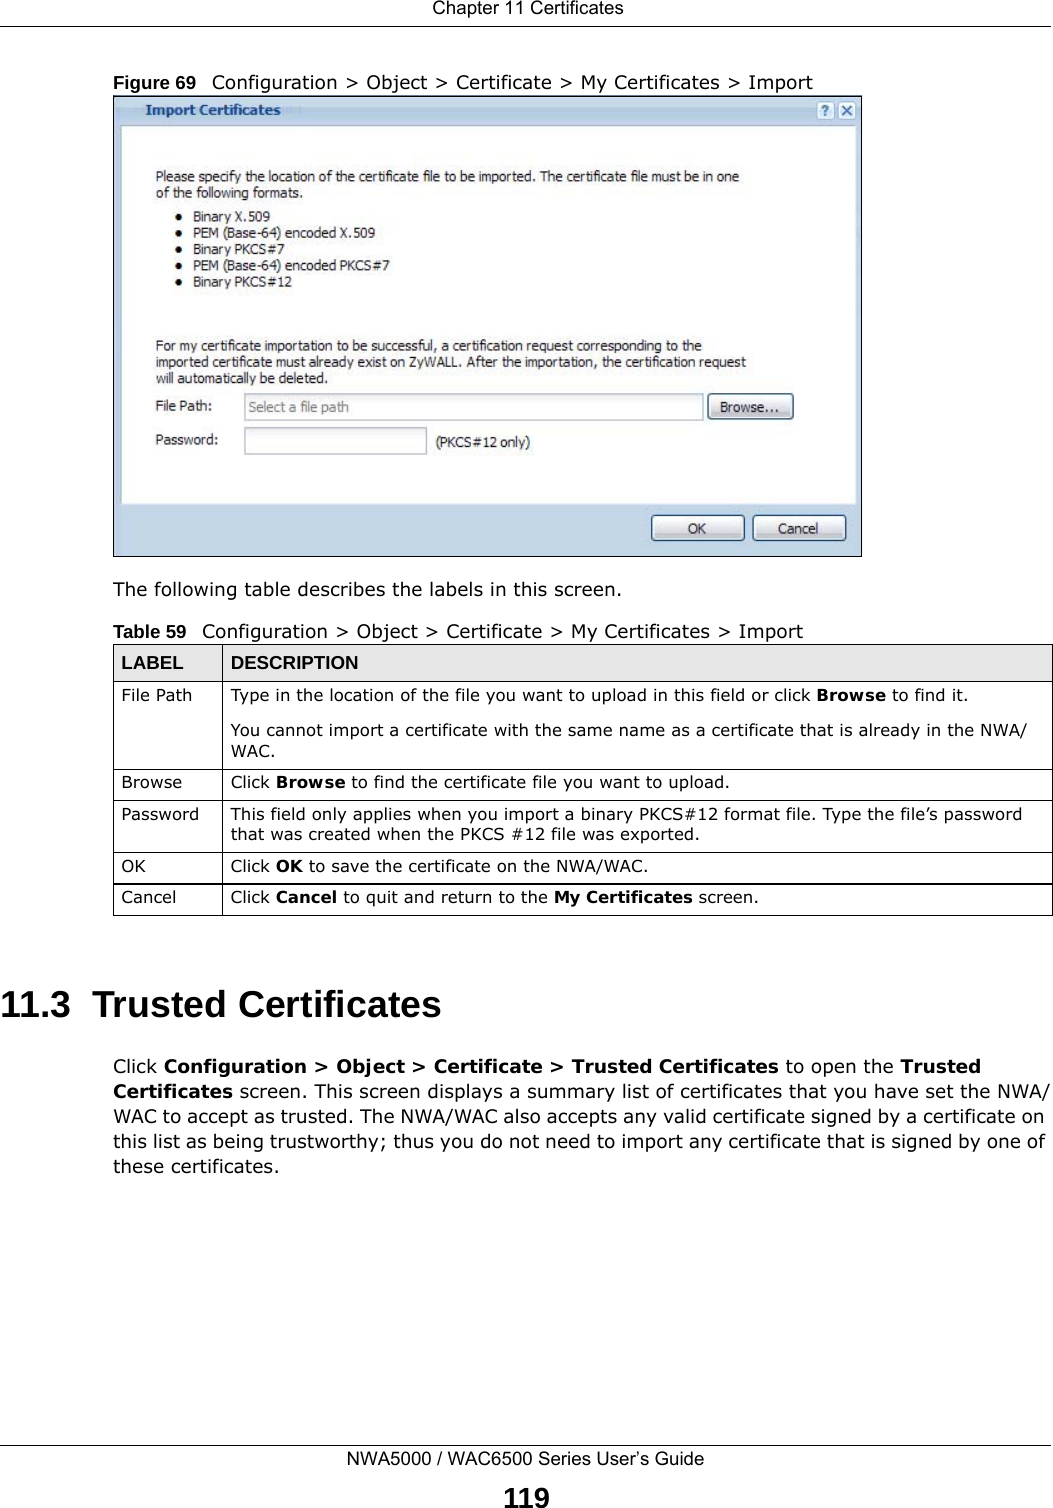  Chapter 11 CertificatesNWA5000 / WAC6500 Series User’s Guide119Figure 69   Configuration &gt; Object &gt; Certificate &gt; My Certificates &gt; ImportThe following table describes the labels in this screen.  11.3  Trusted CertificatesClick Configuration &gt; Object &gt; Certificate &gt; Trusted Certificates to open the Trusted Certificates screen. This screen displays a summary list of certificates that you have set the NWA/WAC to accept as trusted. The NWA/WAC also accepts any valid certificate signed by a certificate on this list as being trustworthy; thus you do not need to import any certificate that is signed by one of these certificates. Table 59   Configuration &gt; Object &gt; Certificate &gt; My Certificates &gt; ImportLABEL DESCRIPTIONFile Path  Type in the location of the file you want to upload in this field or click Browse to find it.You cannot import a certificate with the same name as a certificate that is already in the NWA/WAC.Browse Click Browse to find the certificate file you want to upload. Password This field only applies when you import a binary PKCS#12 format file. Type the file’s password that was created when the PKCS #12 file was exported. OK Click OK to save the certificate on the NWA/WAC.Cancel Click Cancel to quit and return to the My Certificates screen.